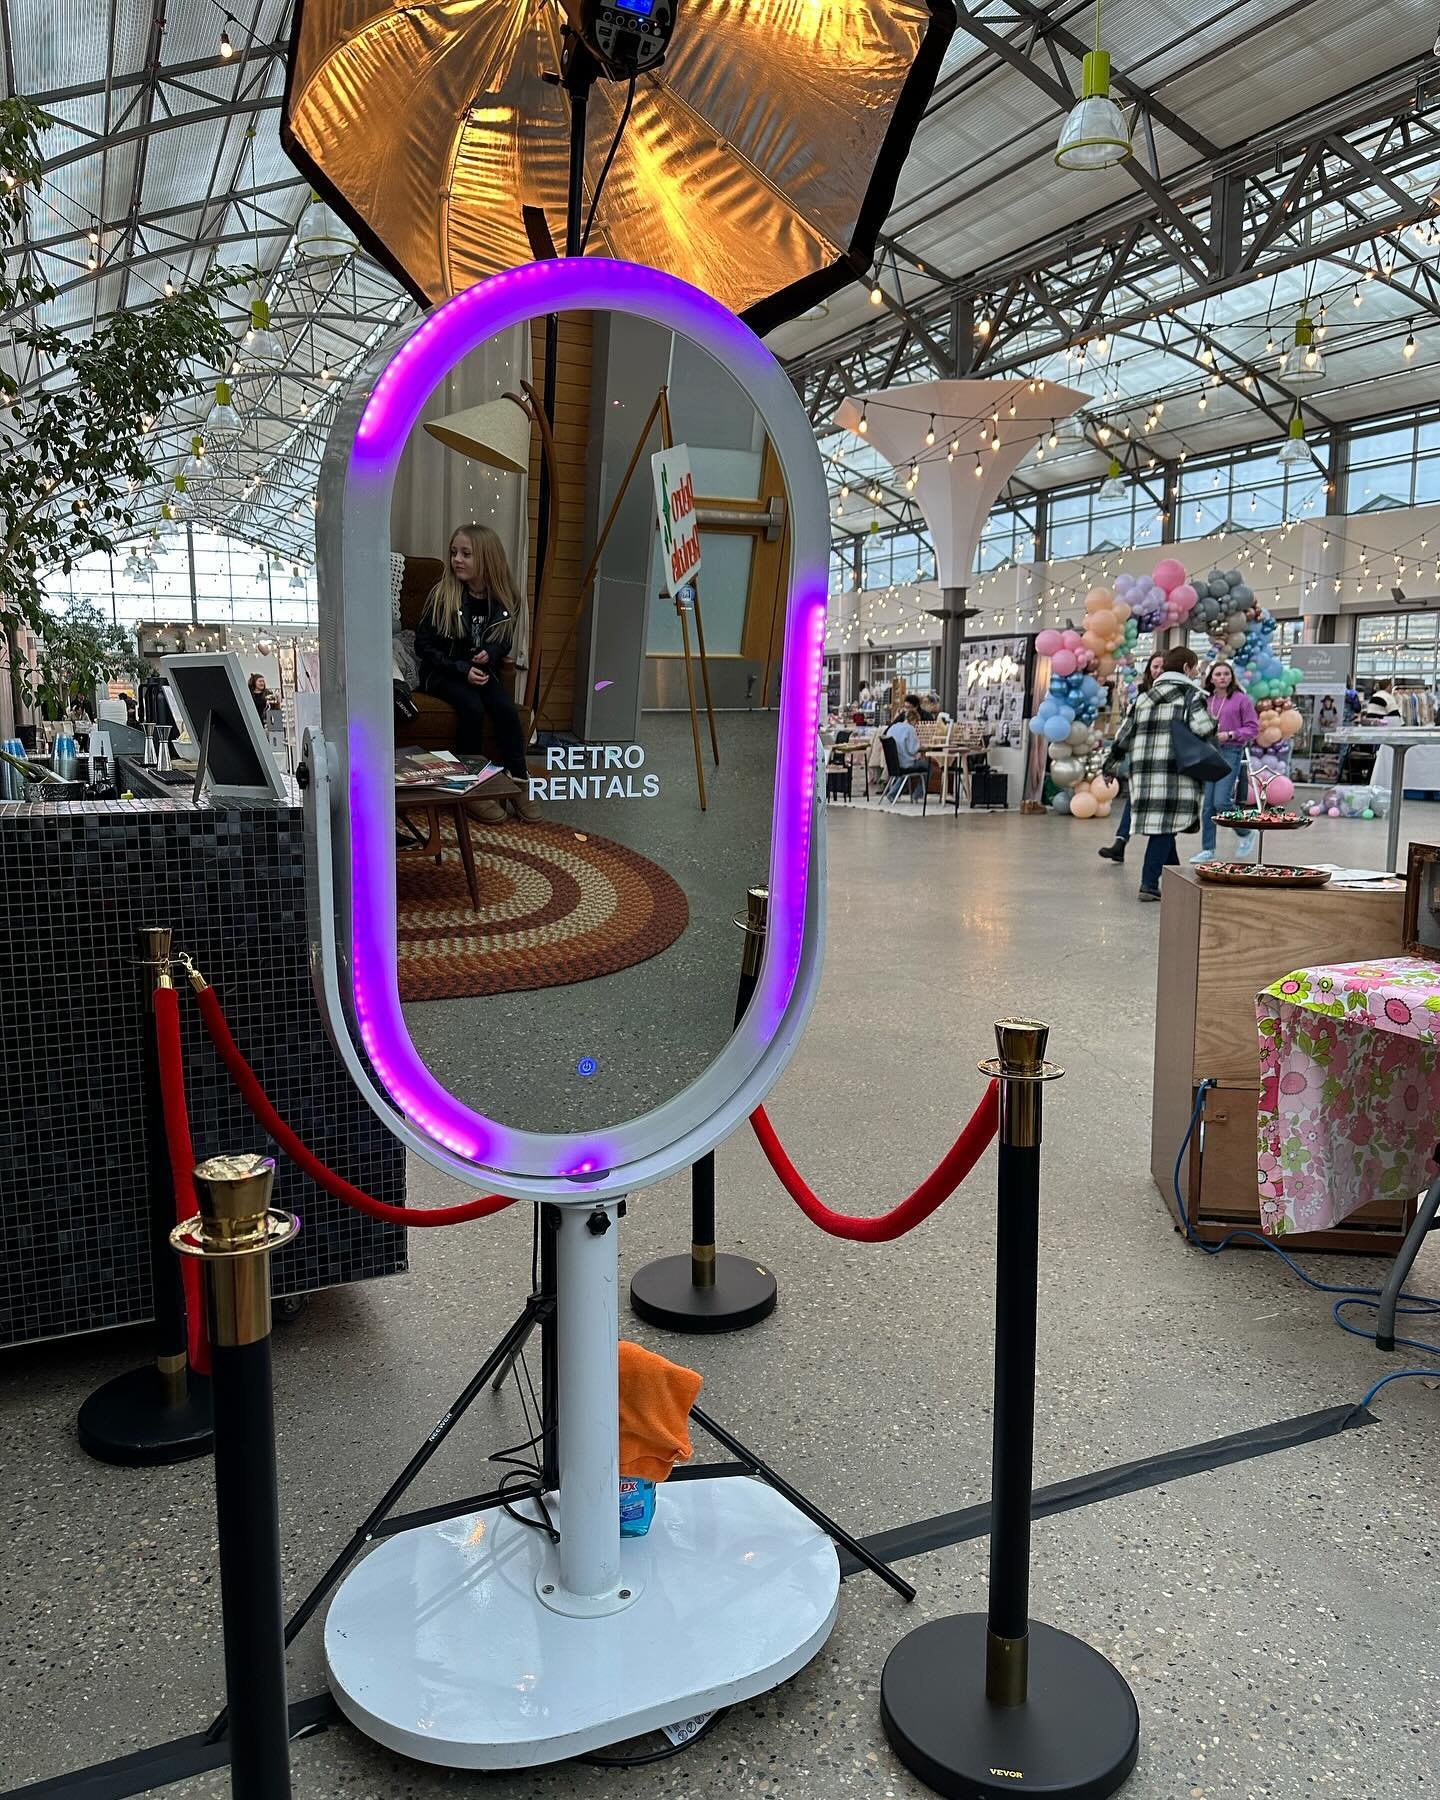 ✨ Now Available - PHOTO BOOTHS! ✨

We thrilled to announce that we now offer 3 different styles of photo booths! 360&deg; video booth, D-Pro &amp; the Magic Mirror (as pictured above). 

More details on our website - or reach out via DM! 💌